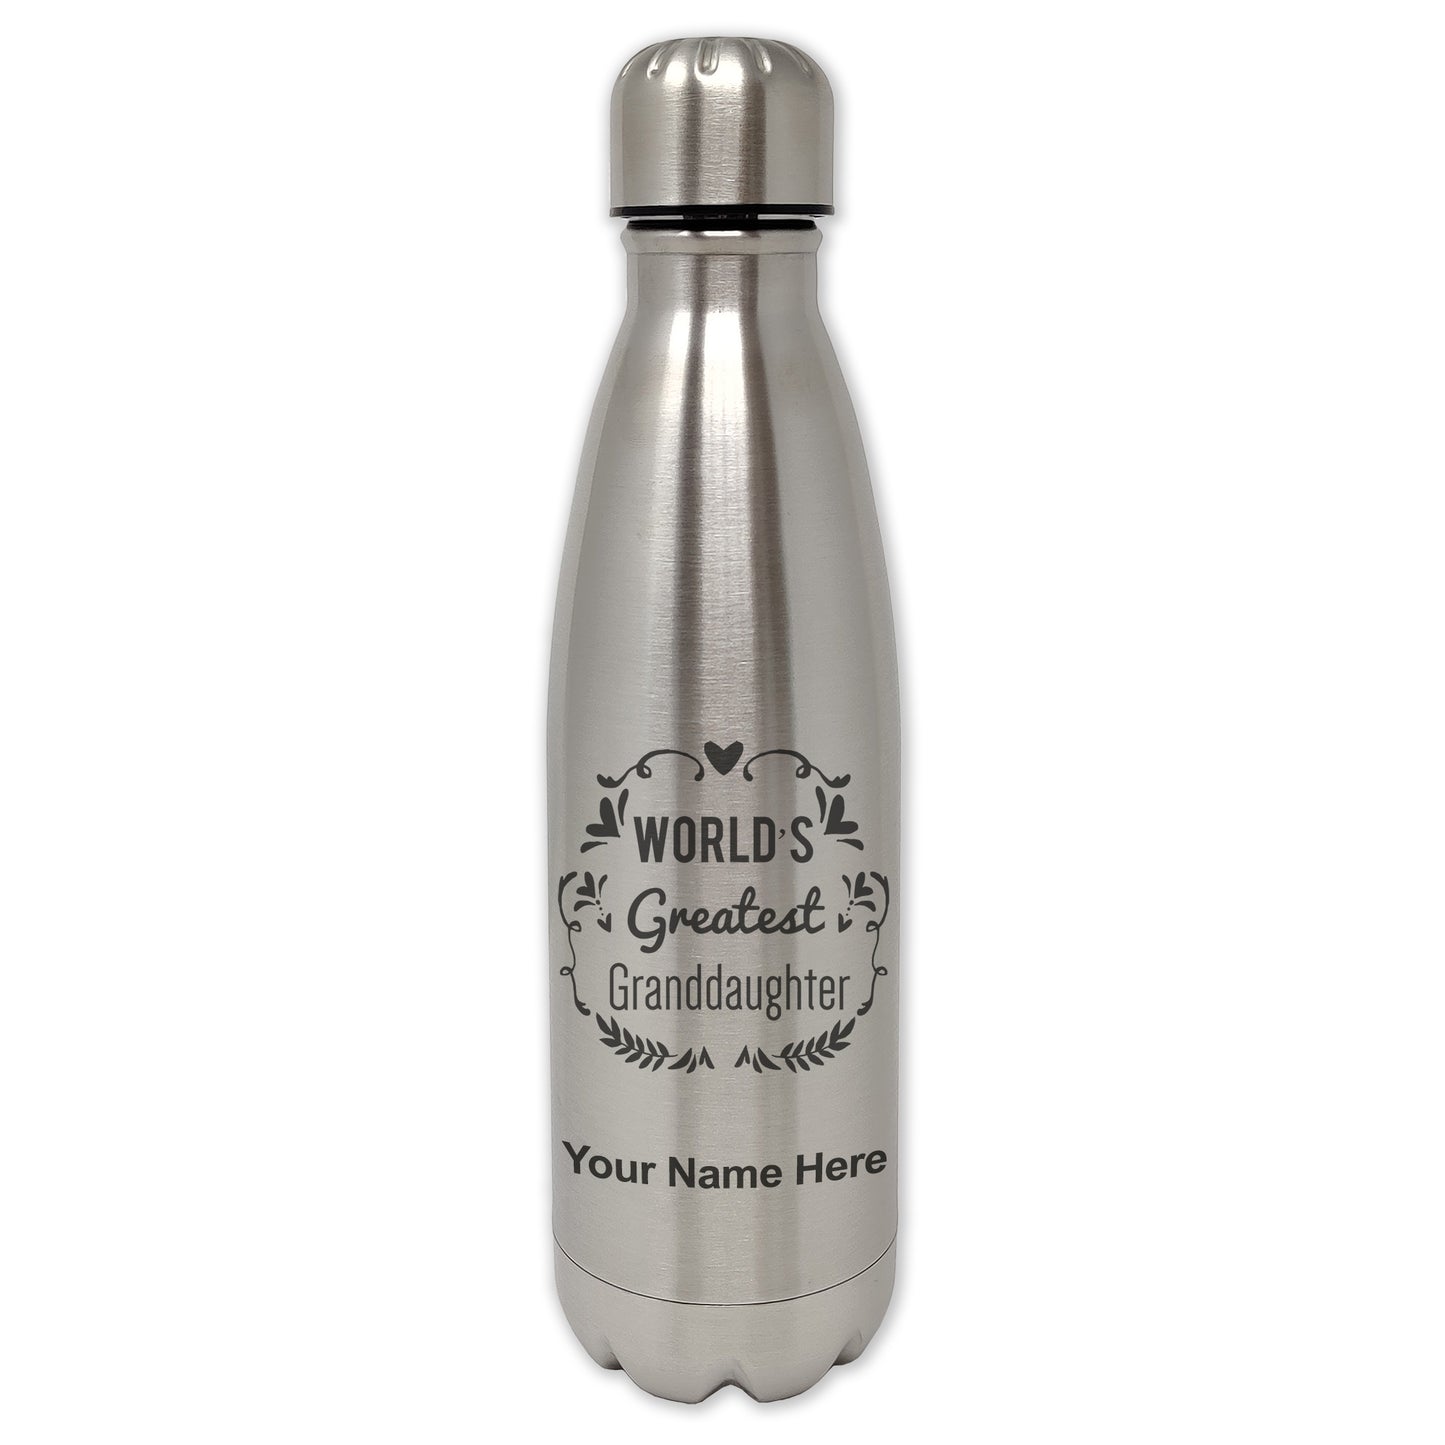 LaserGram Single Wall Water Bottle, World's Greatest Granddaughter, Personalized Engraving Included